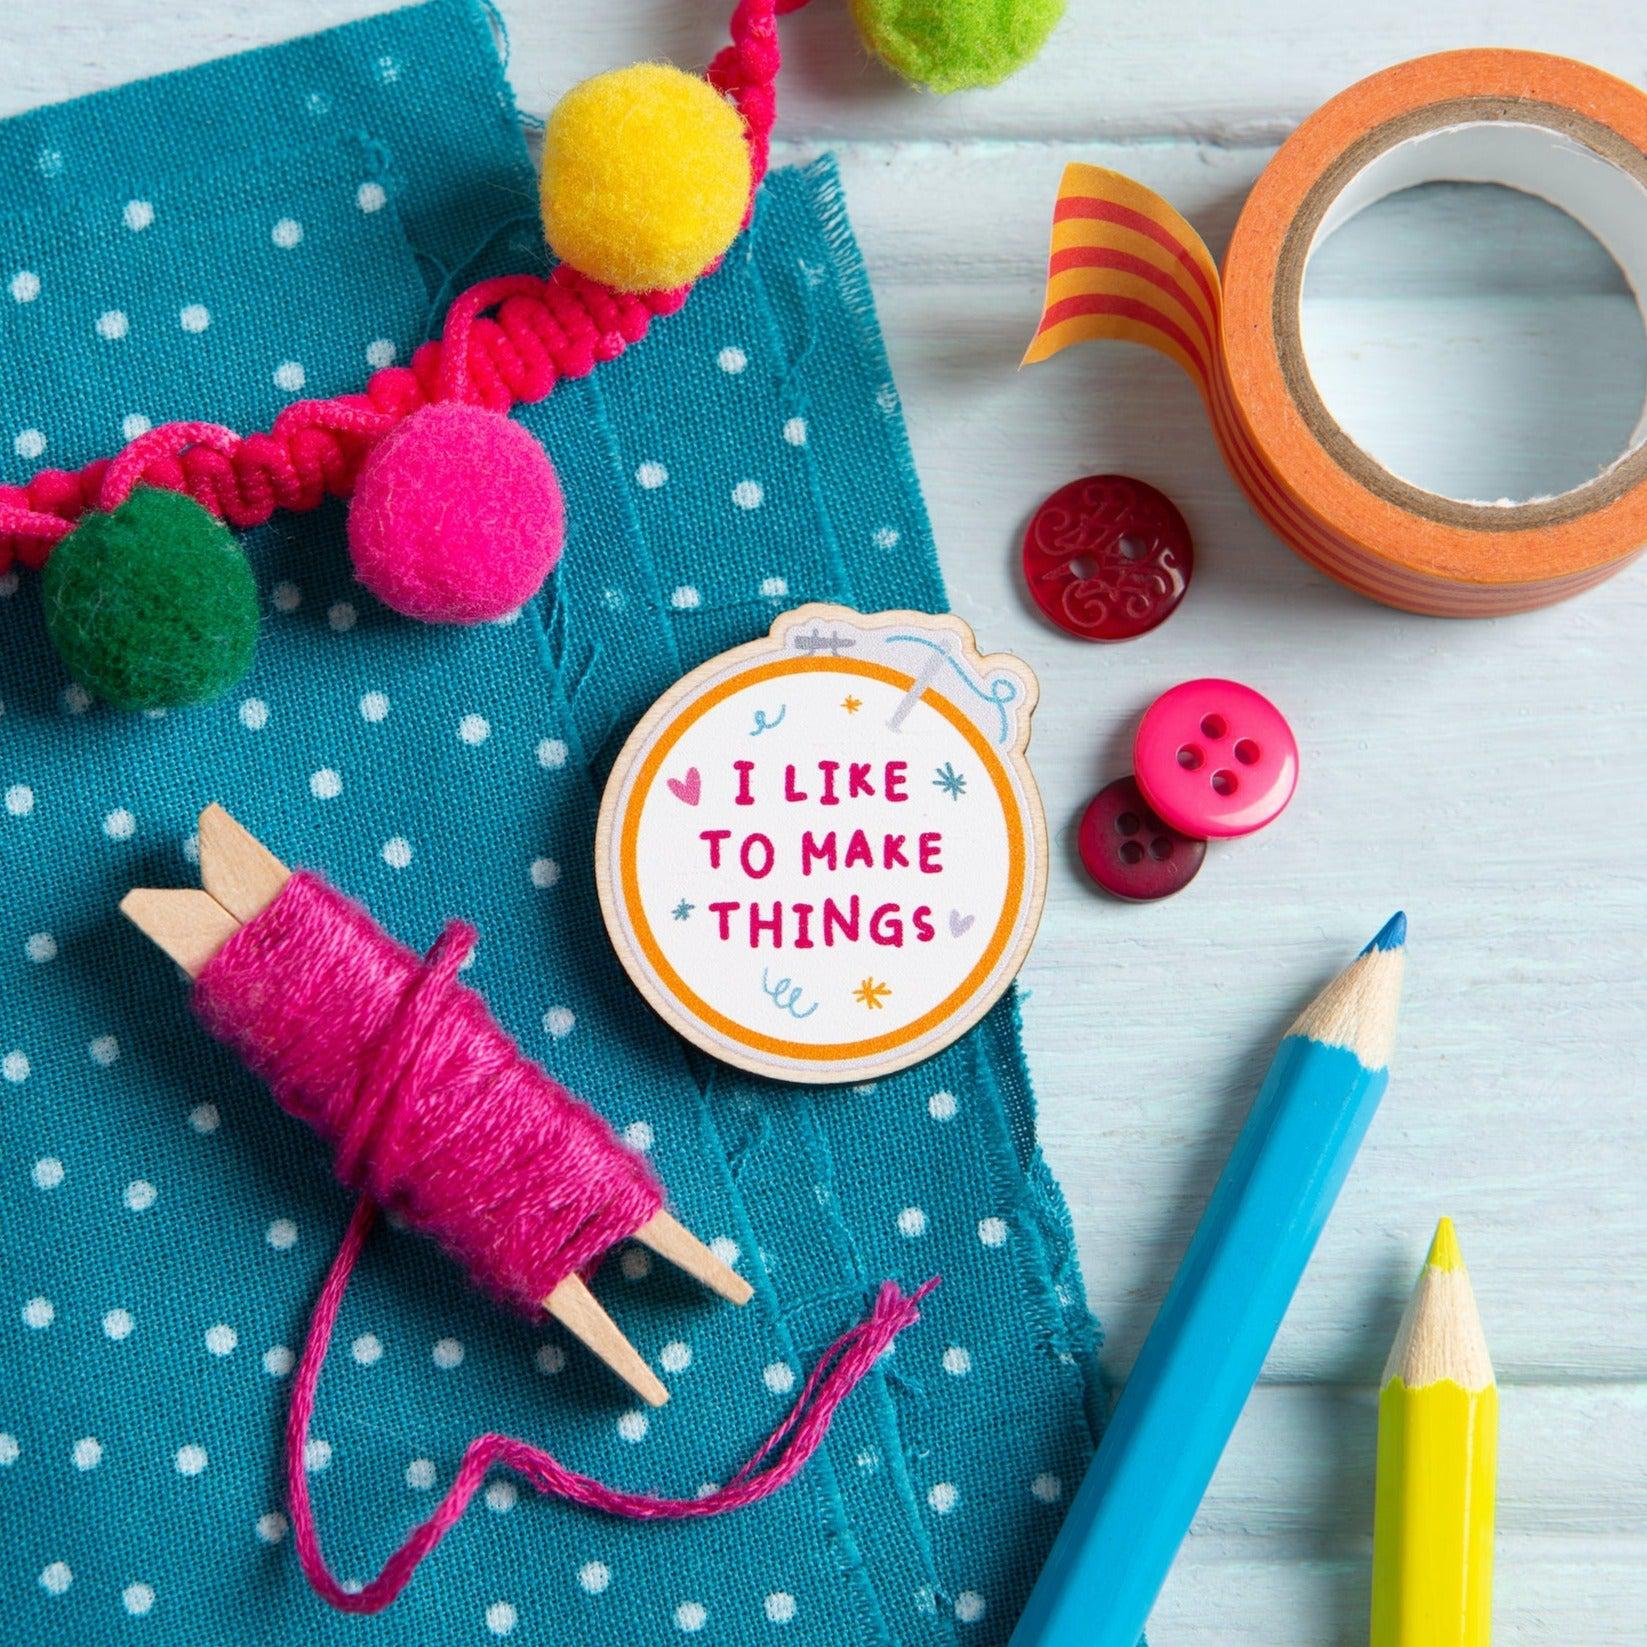 35 of the best needle minders - Gathered